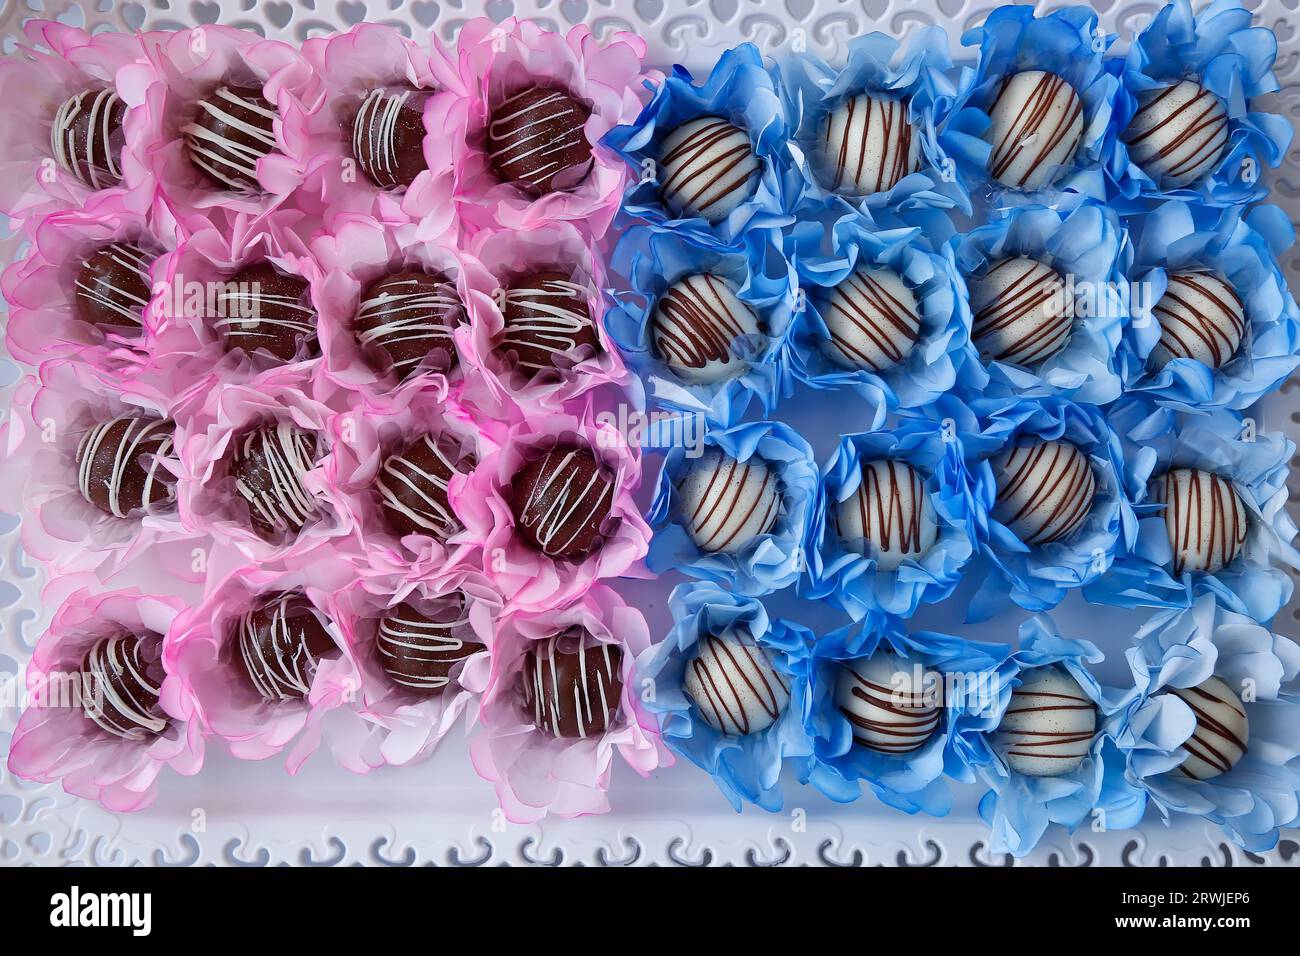 Delicious party candy, celebration candy, reception food Stock Photo